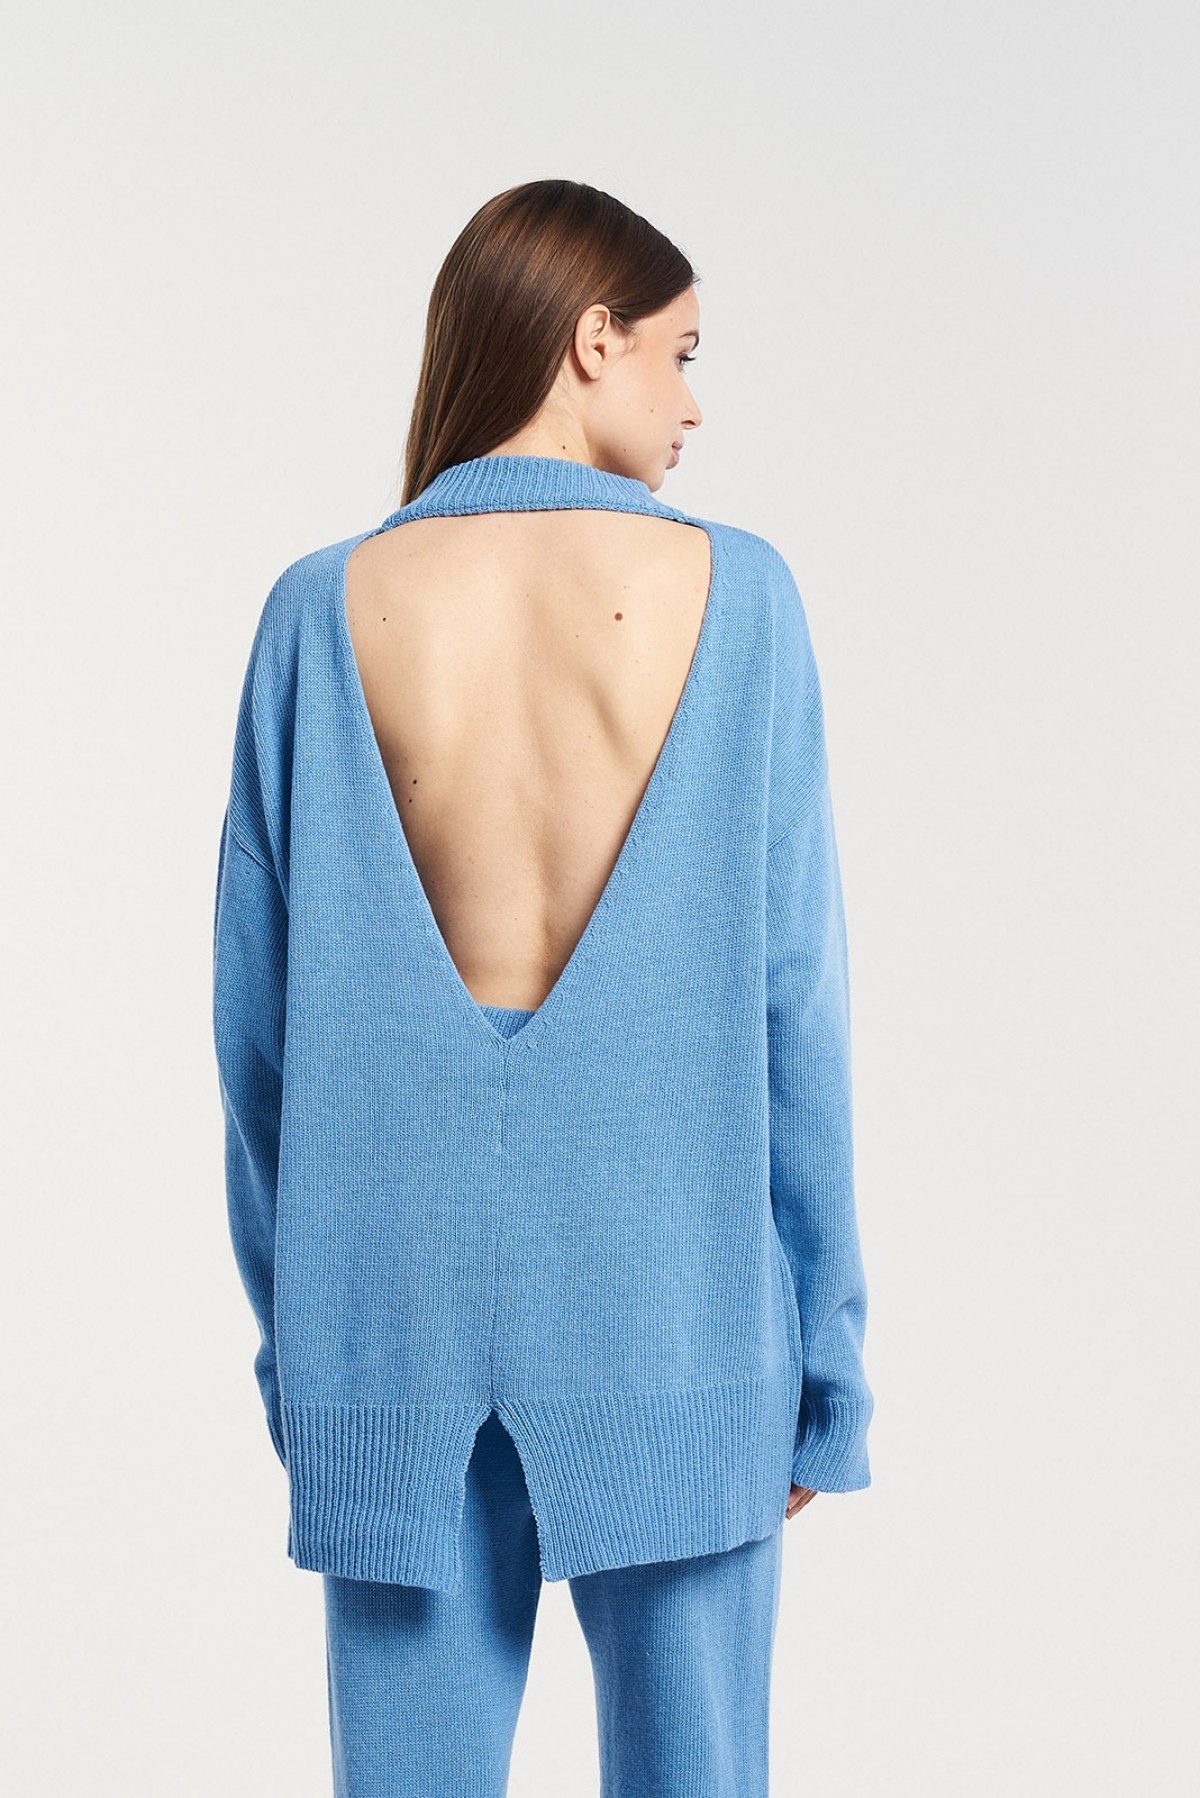 CHRISTELLE NIMA CASHMERE LONG OPEN BACK BLOUSE IN BABY BLUE